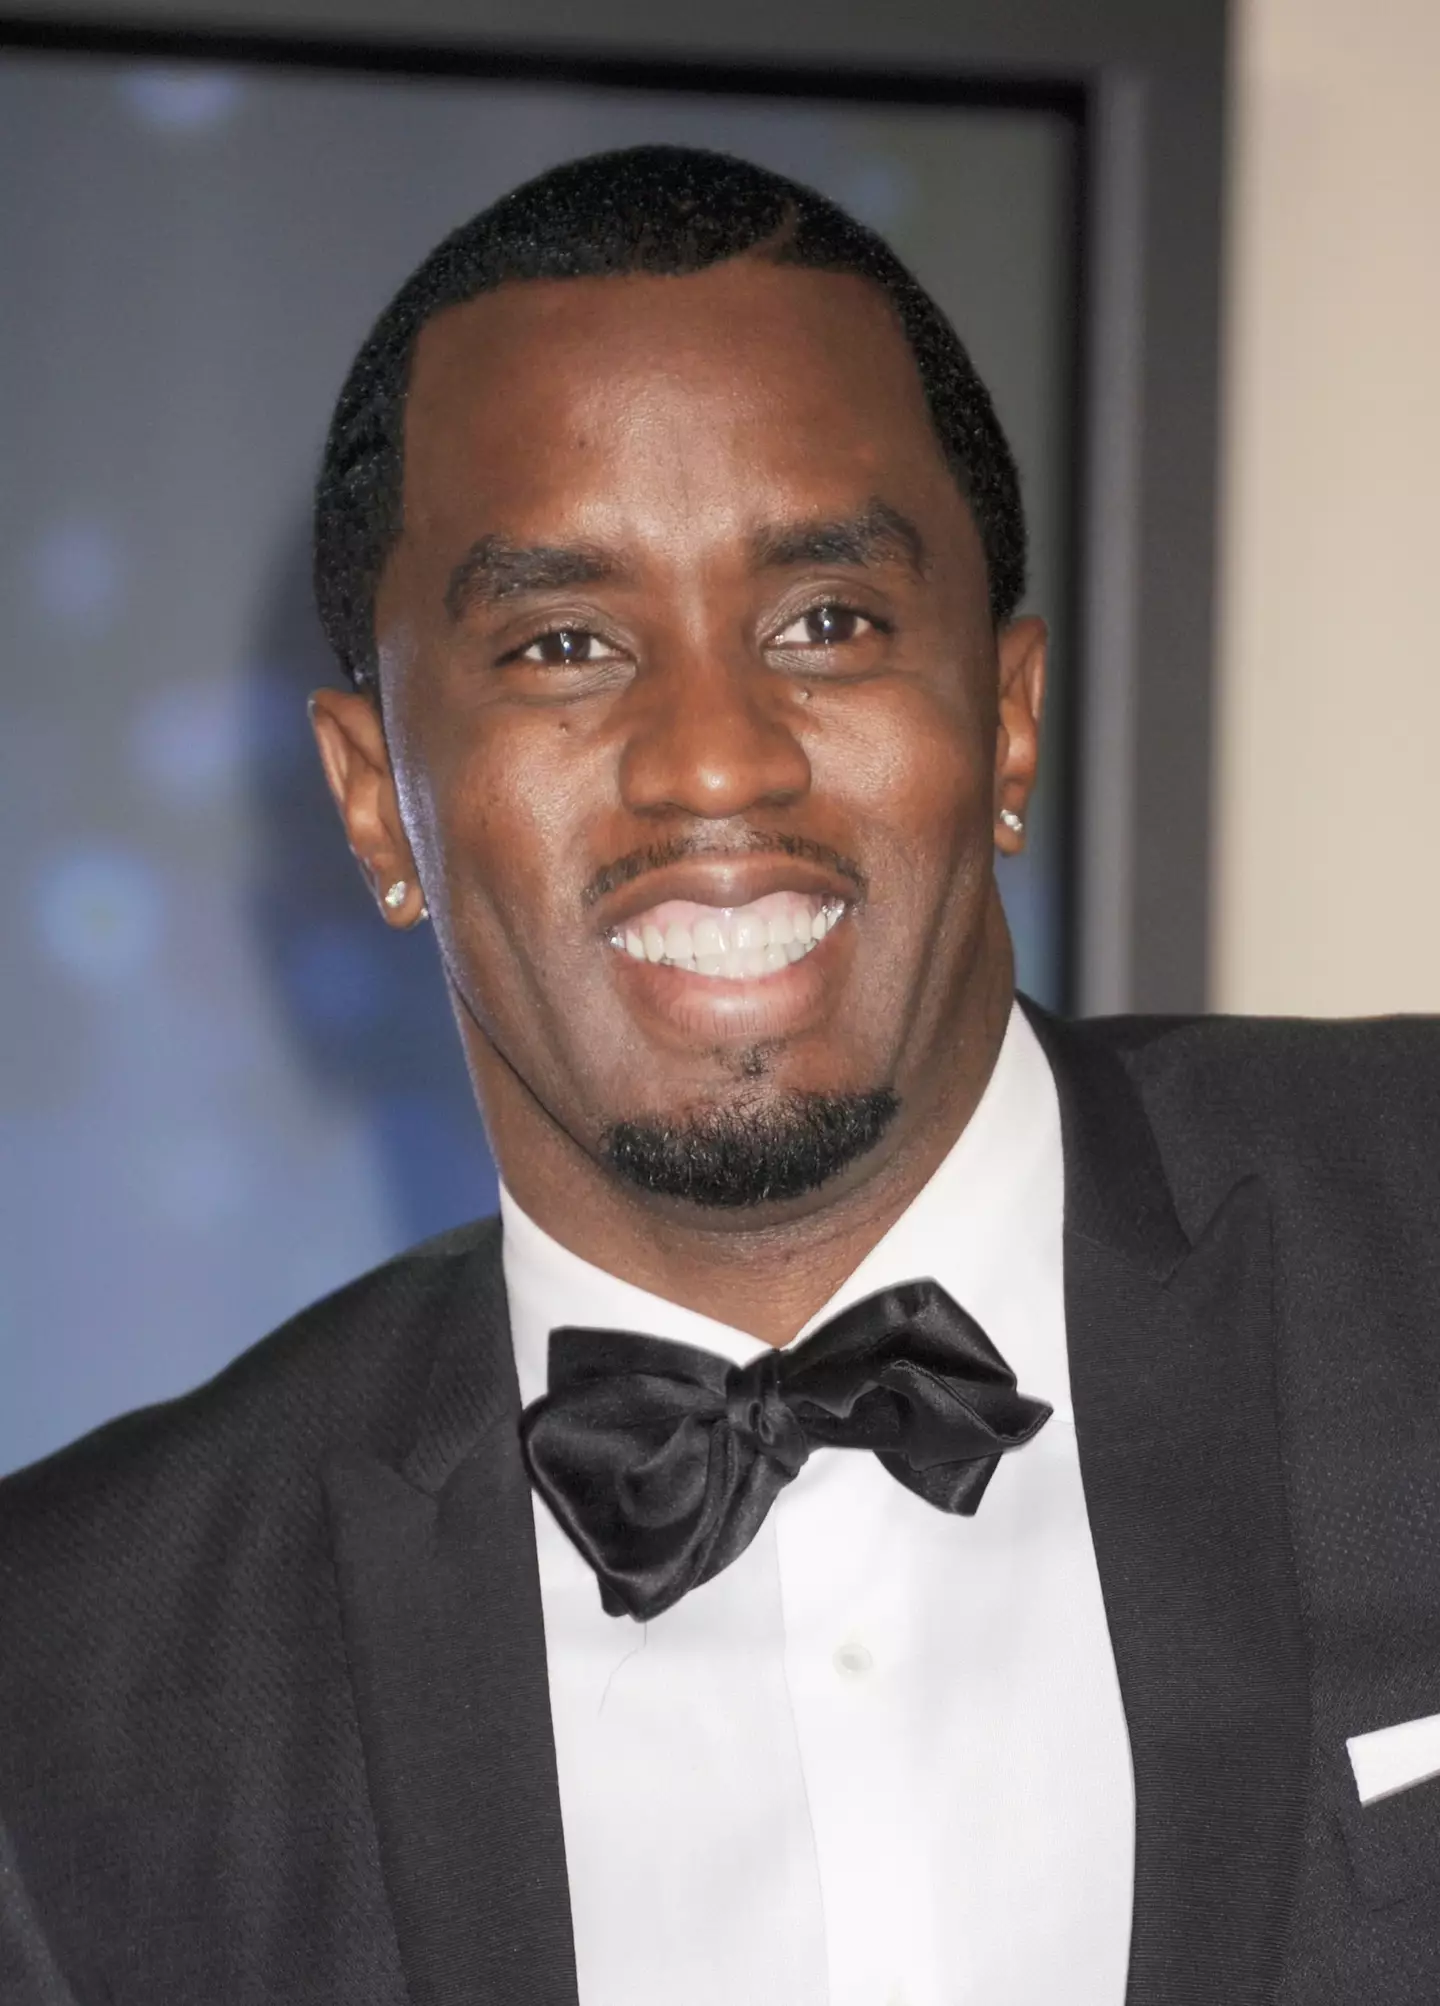 Diddy now takes the second spot, with a net worth of $1 billion (£861 million).